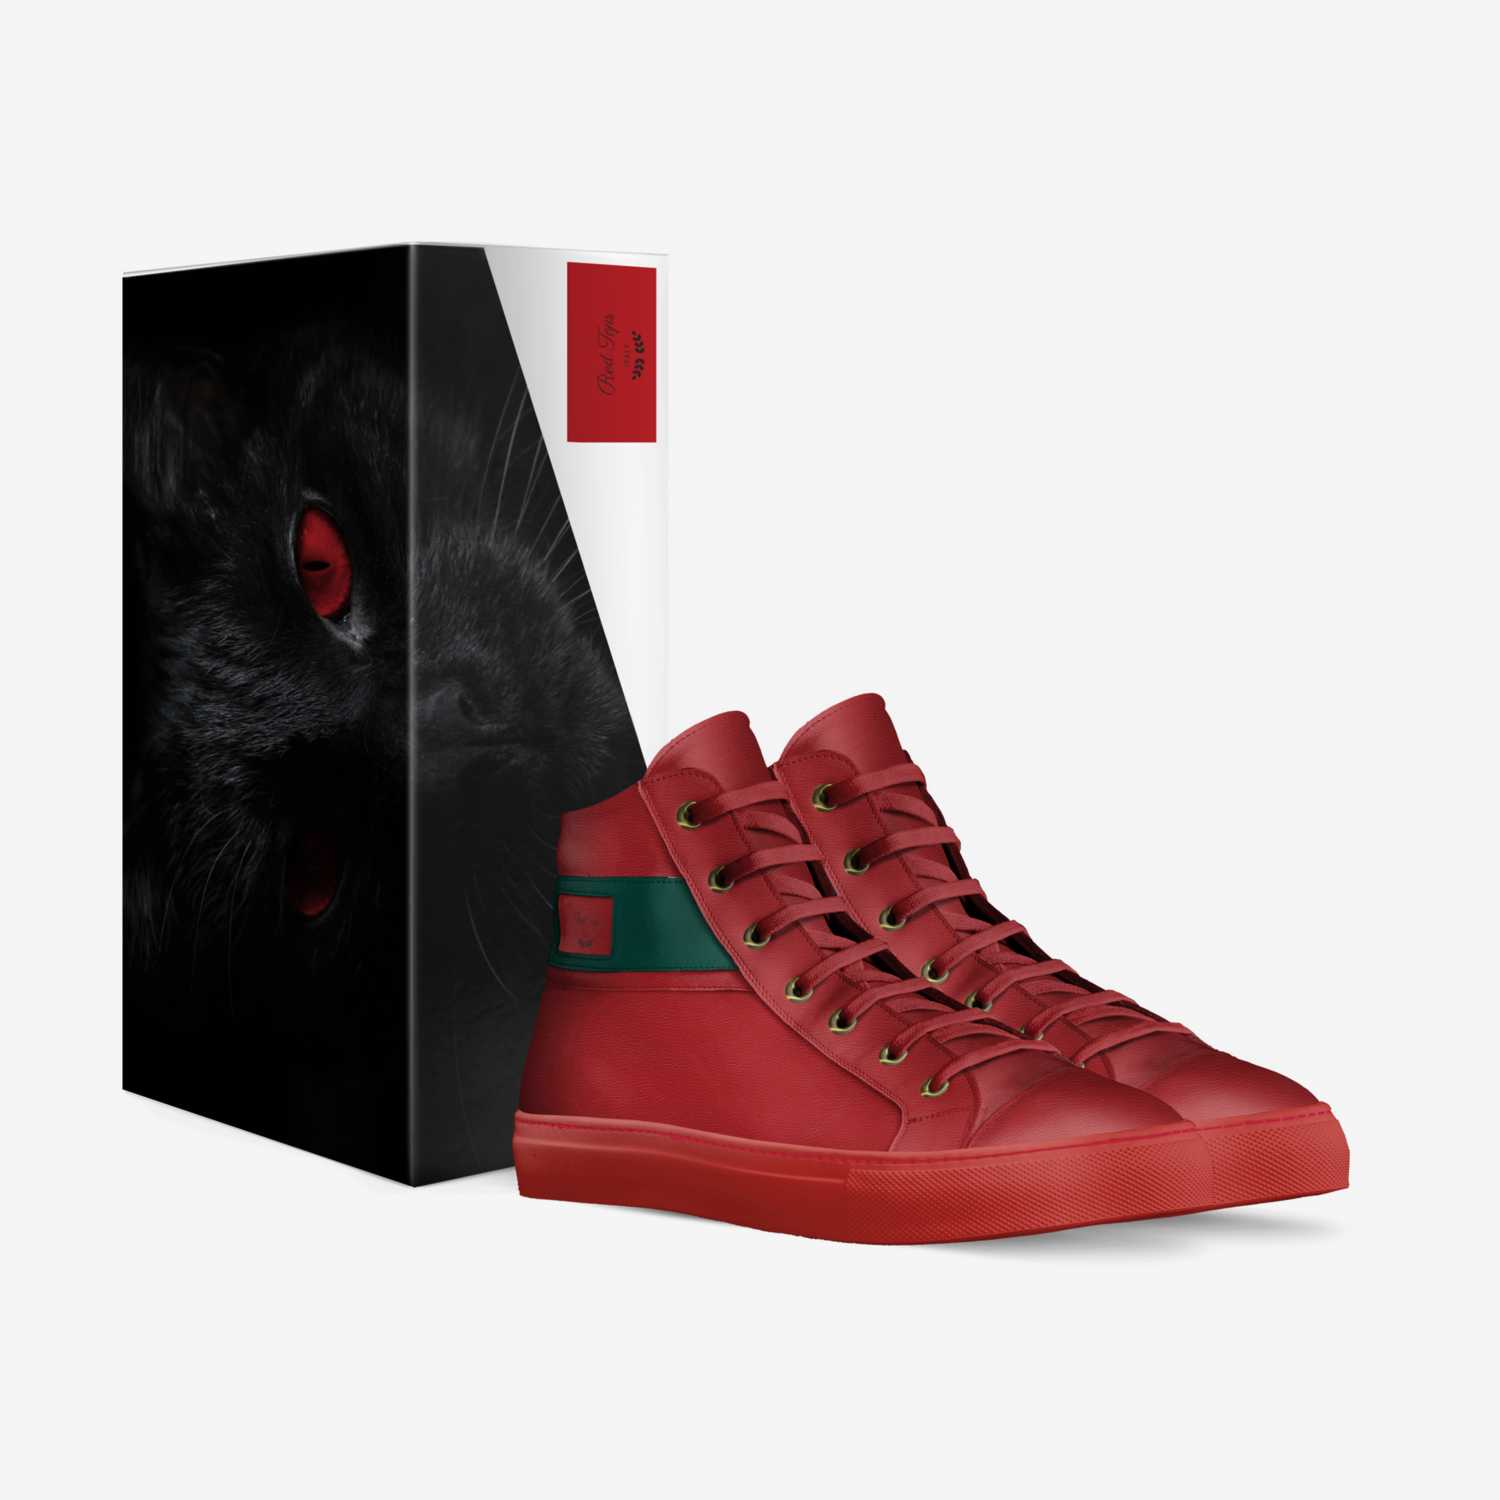 Red Tops custom made in Italy shoes by Ricardo Peña | Box view